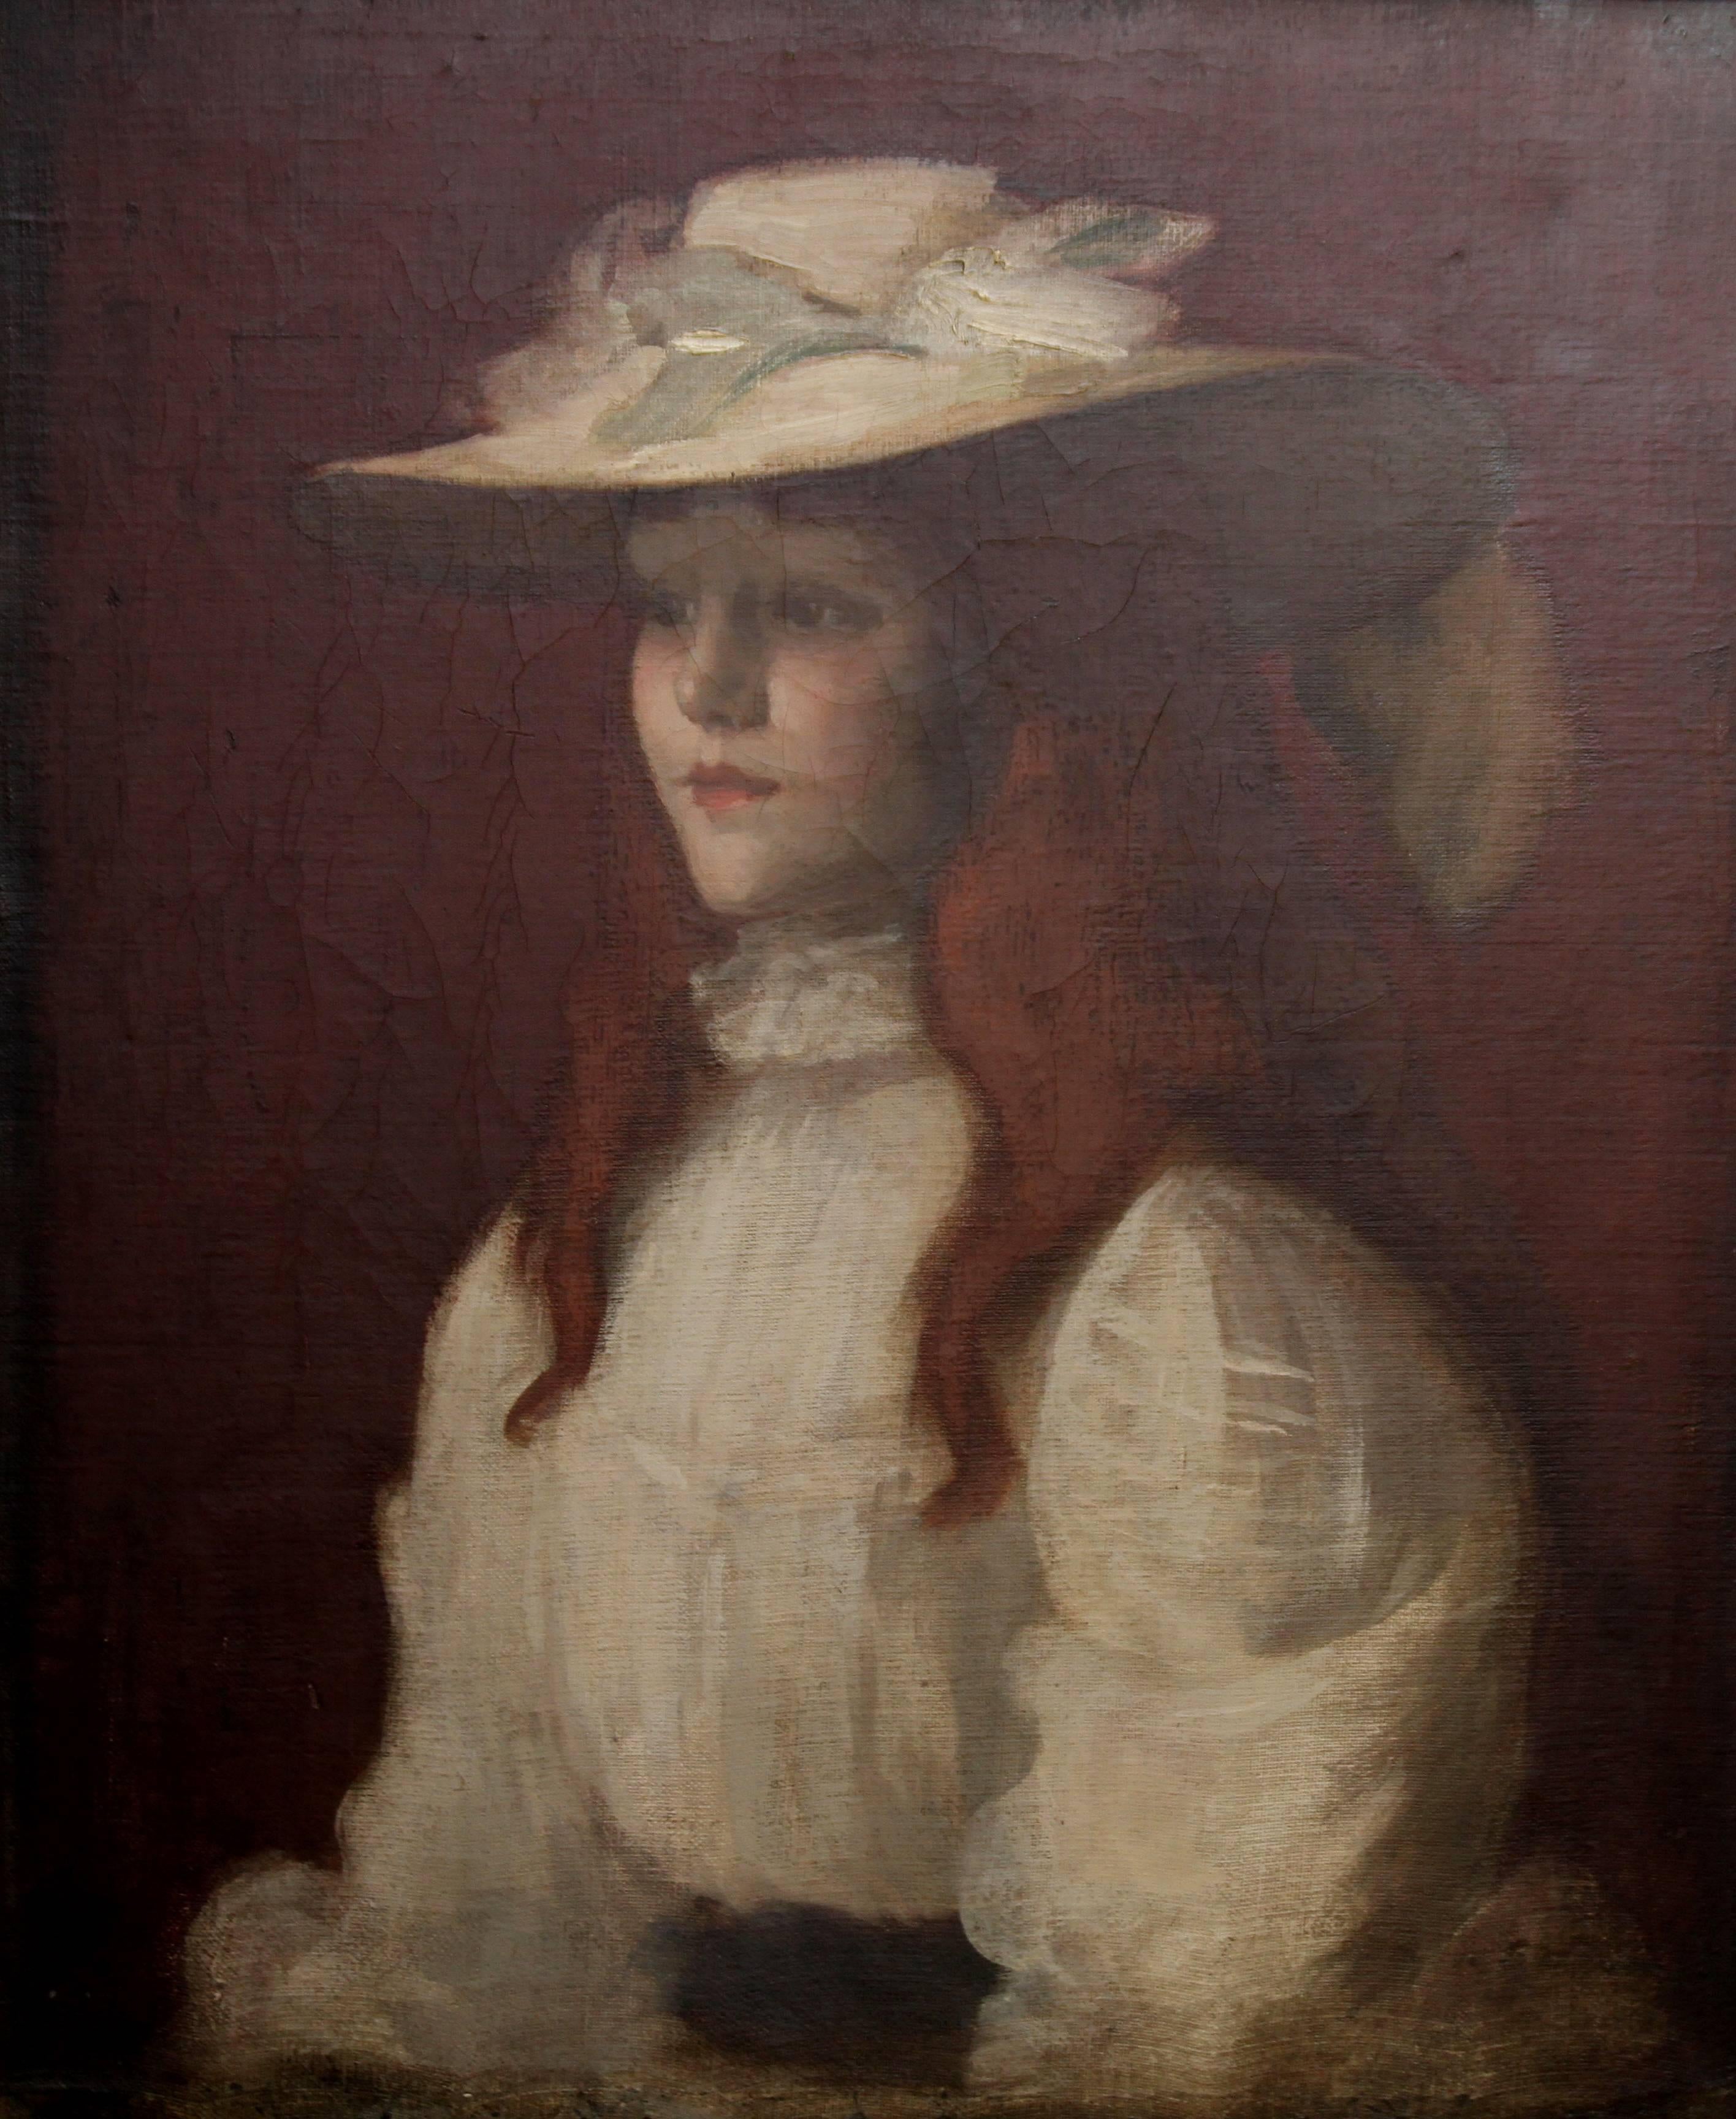 Girl in Straw Hat - Scottish Edwardian Glasgow Girl artist portrait oil painting - Painting by Stansmore Richmond Leslie Deans